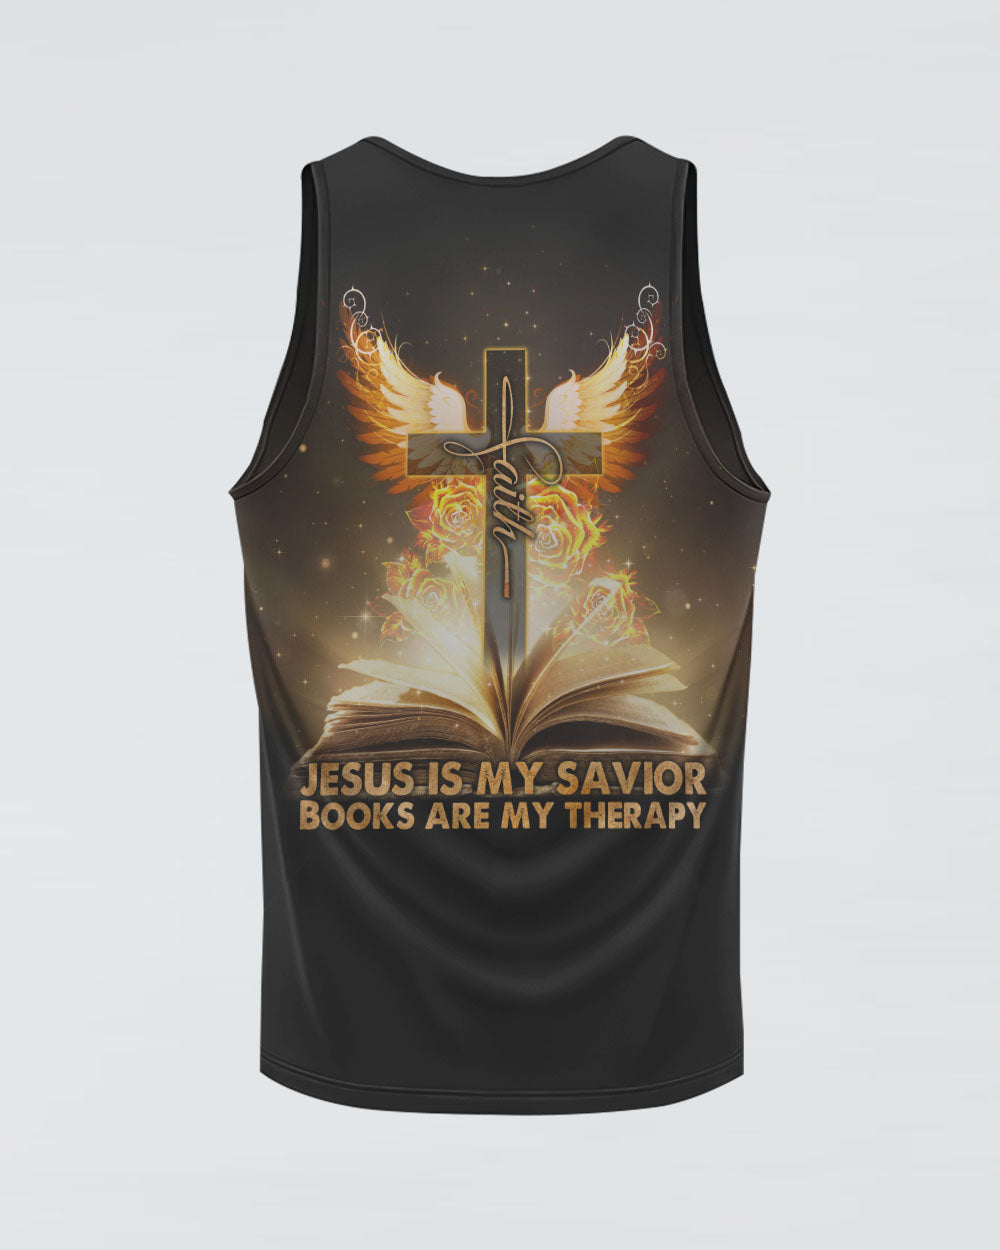 Jesus Is My Savior Books Are My Therapy Gold Faith Cross Women's Christian Tanks